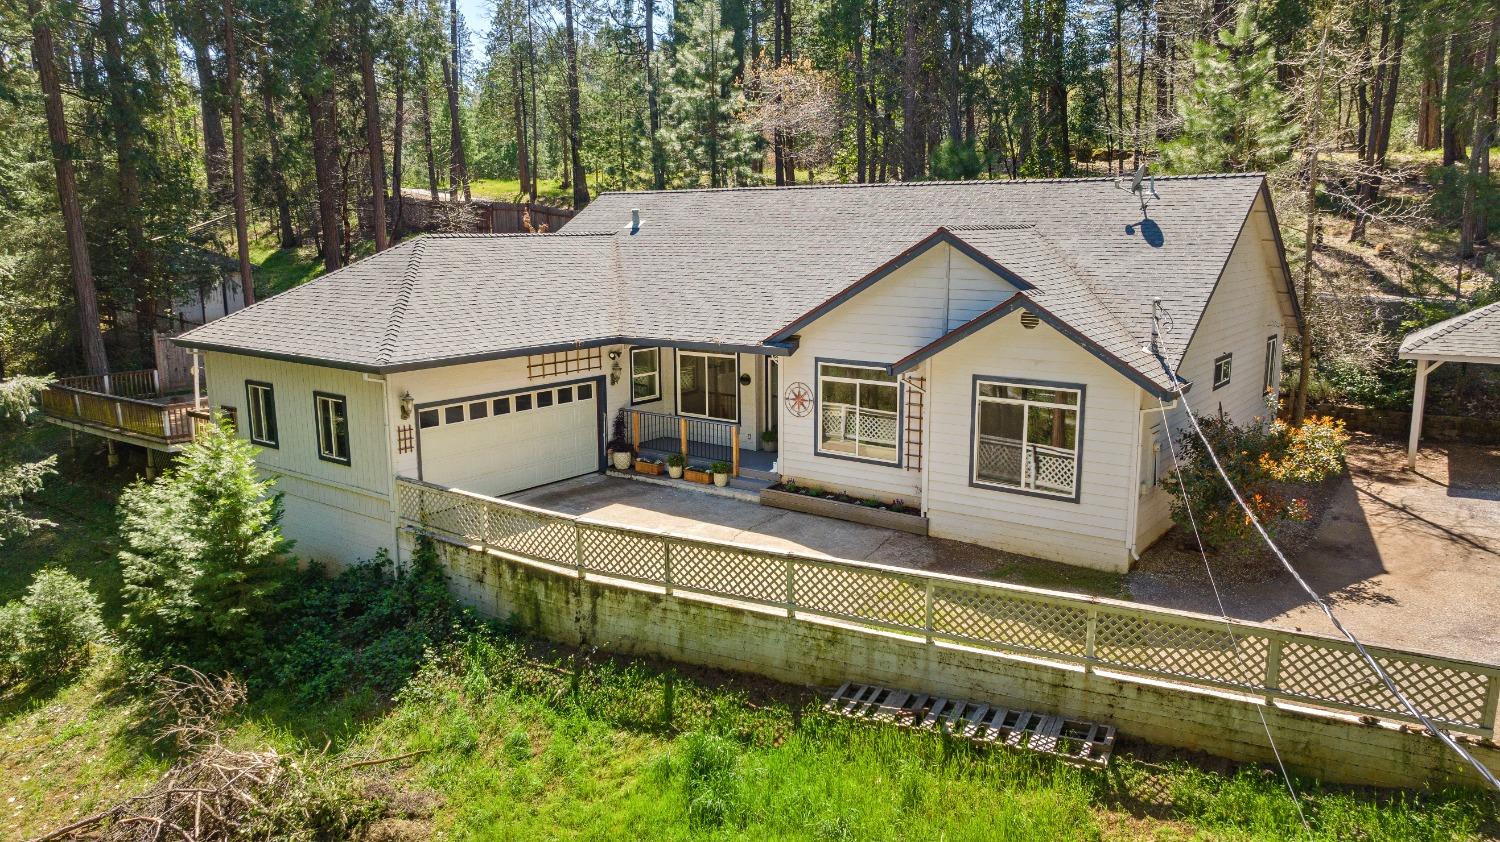 Photo of 13243 Howald Ln in Grass Valley, CA